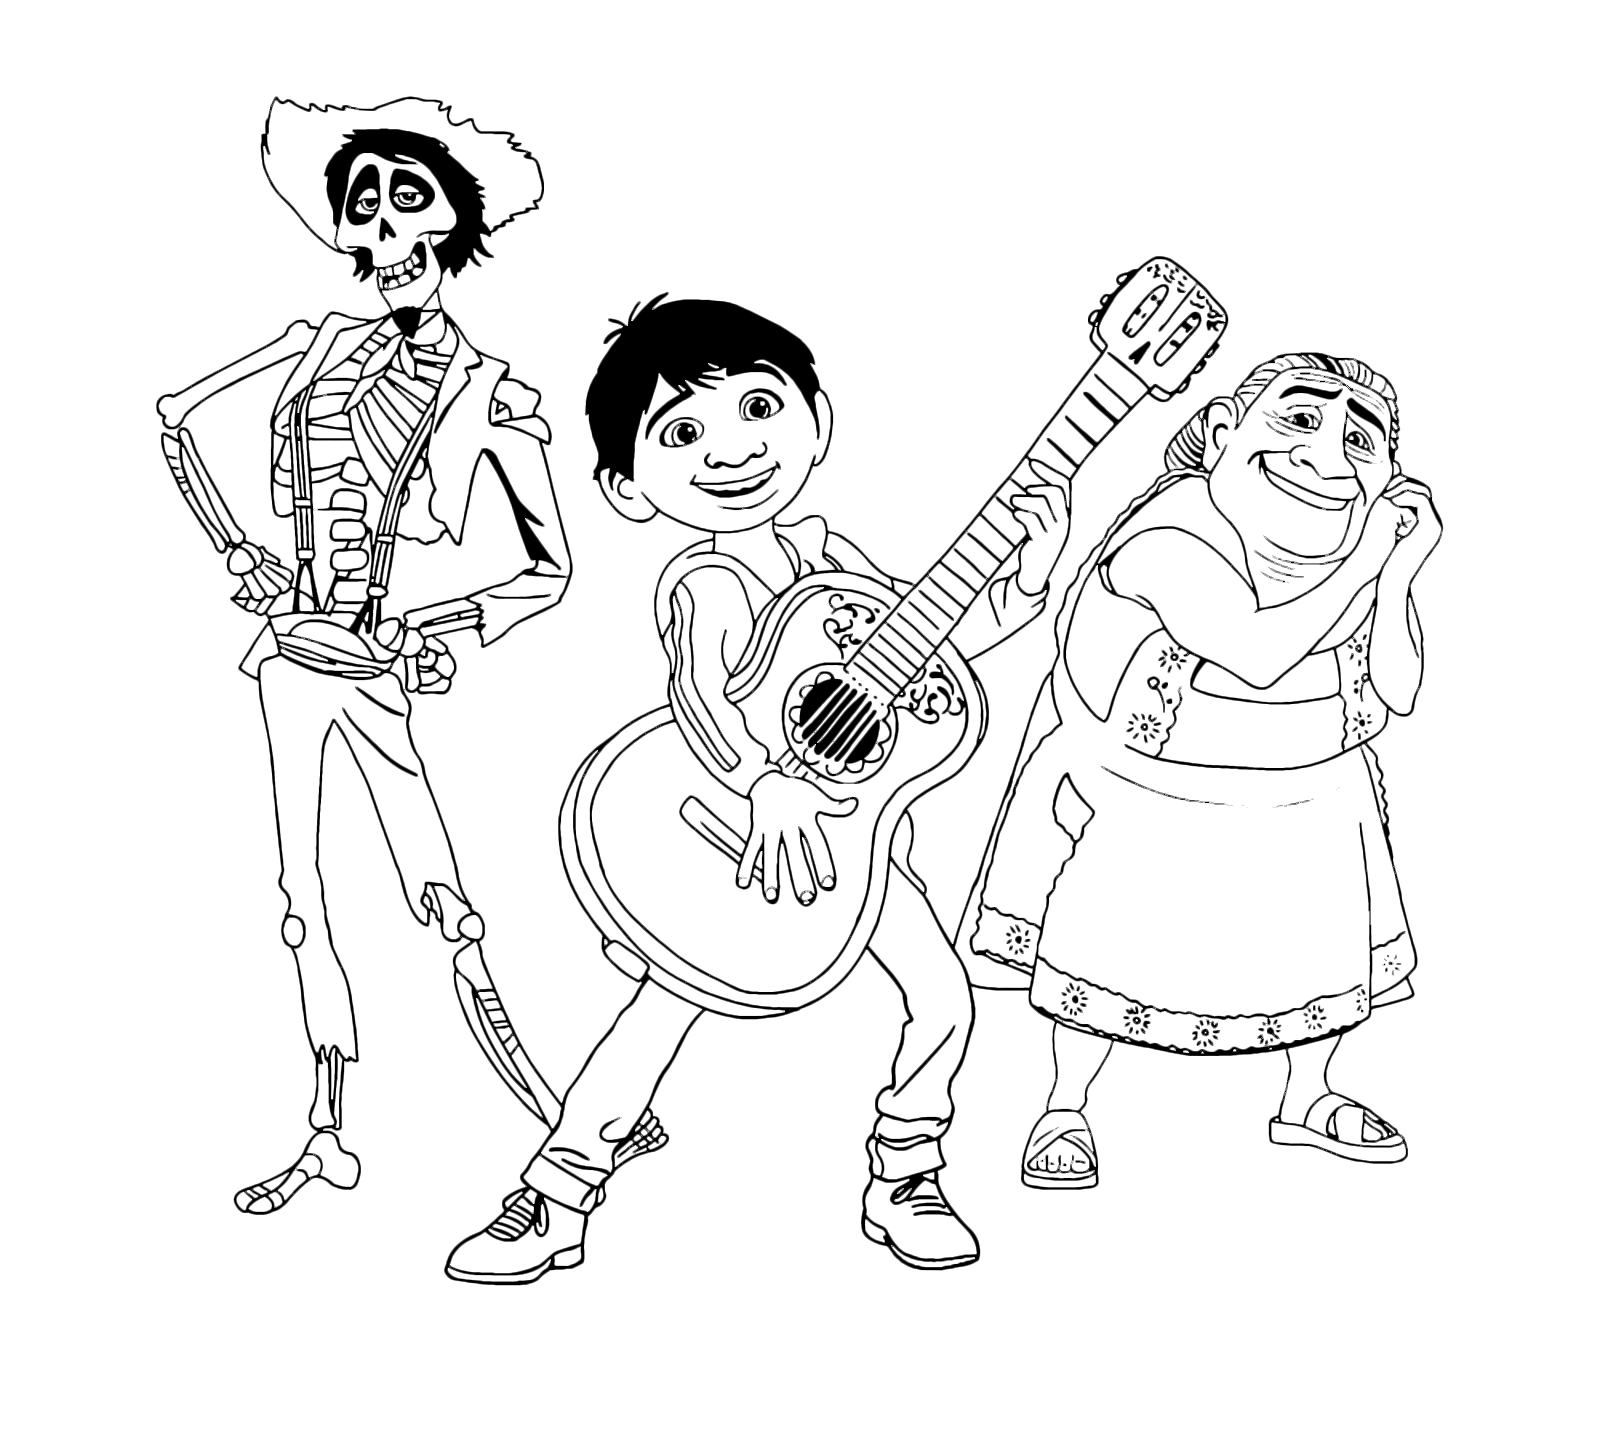 134. coloring page images for 'Coco'. 